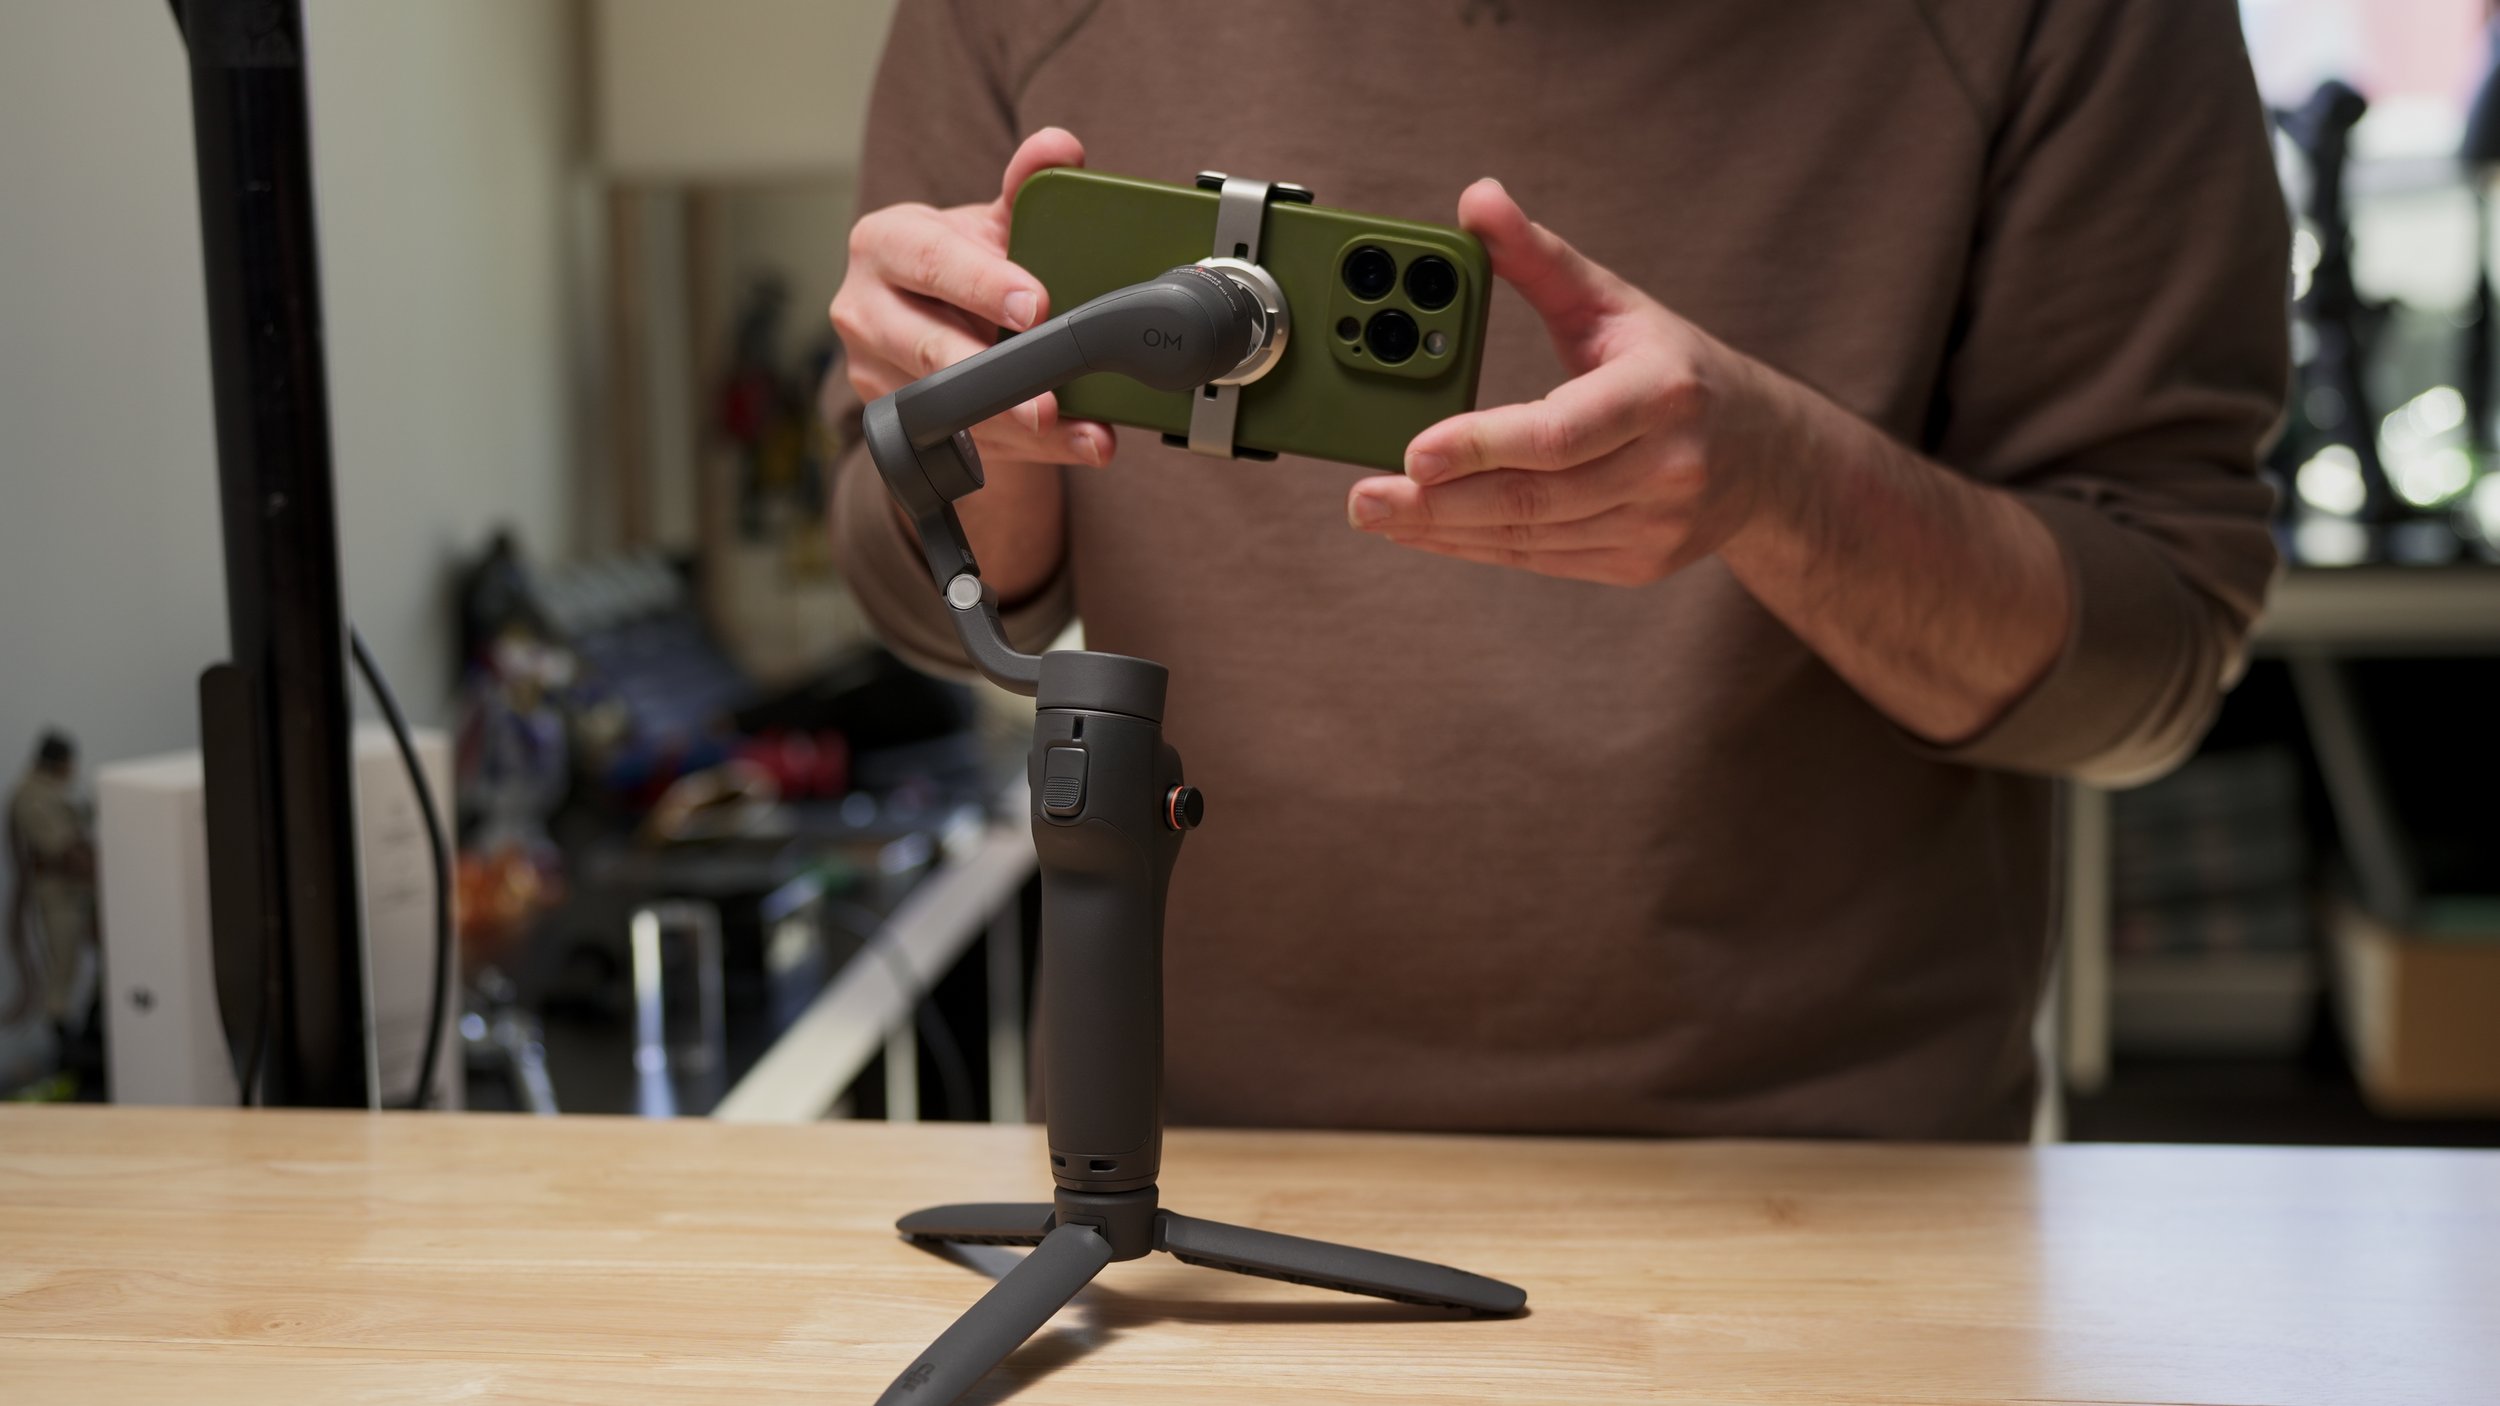 DJI Osmo Mobile 6 - Attaching Magnetic Clamp to Gimbal.jpg